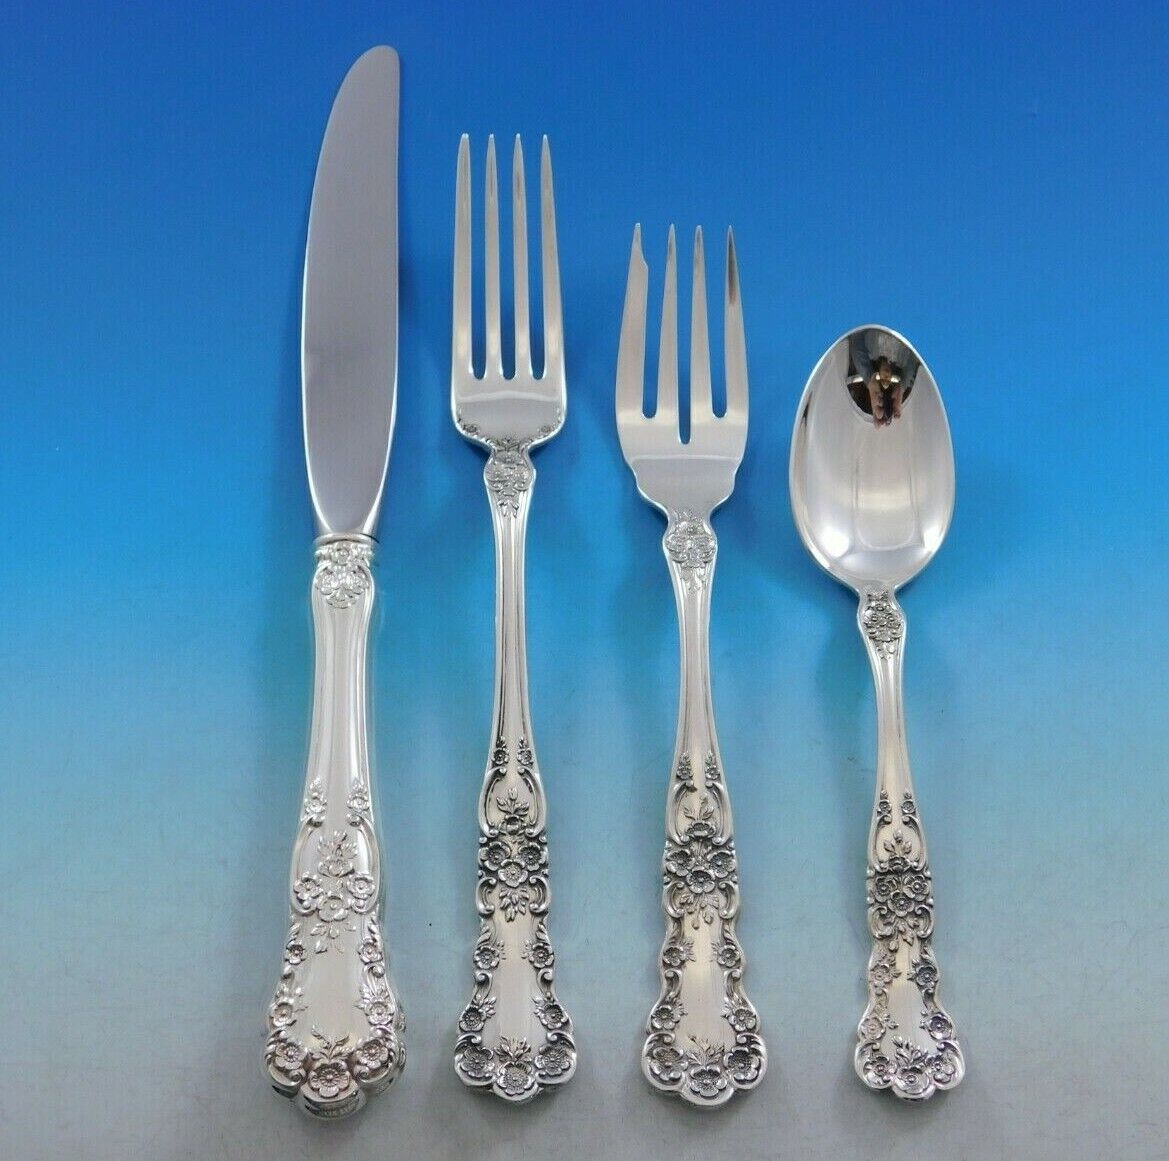 Buttercup by Gorham Sterling Silver Flatware Set 8 Place Size Service 32 Pieces 